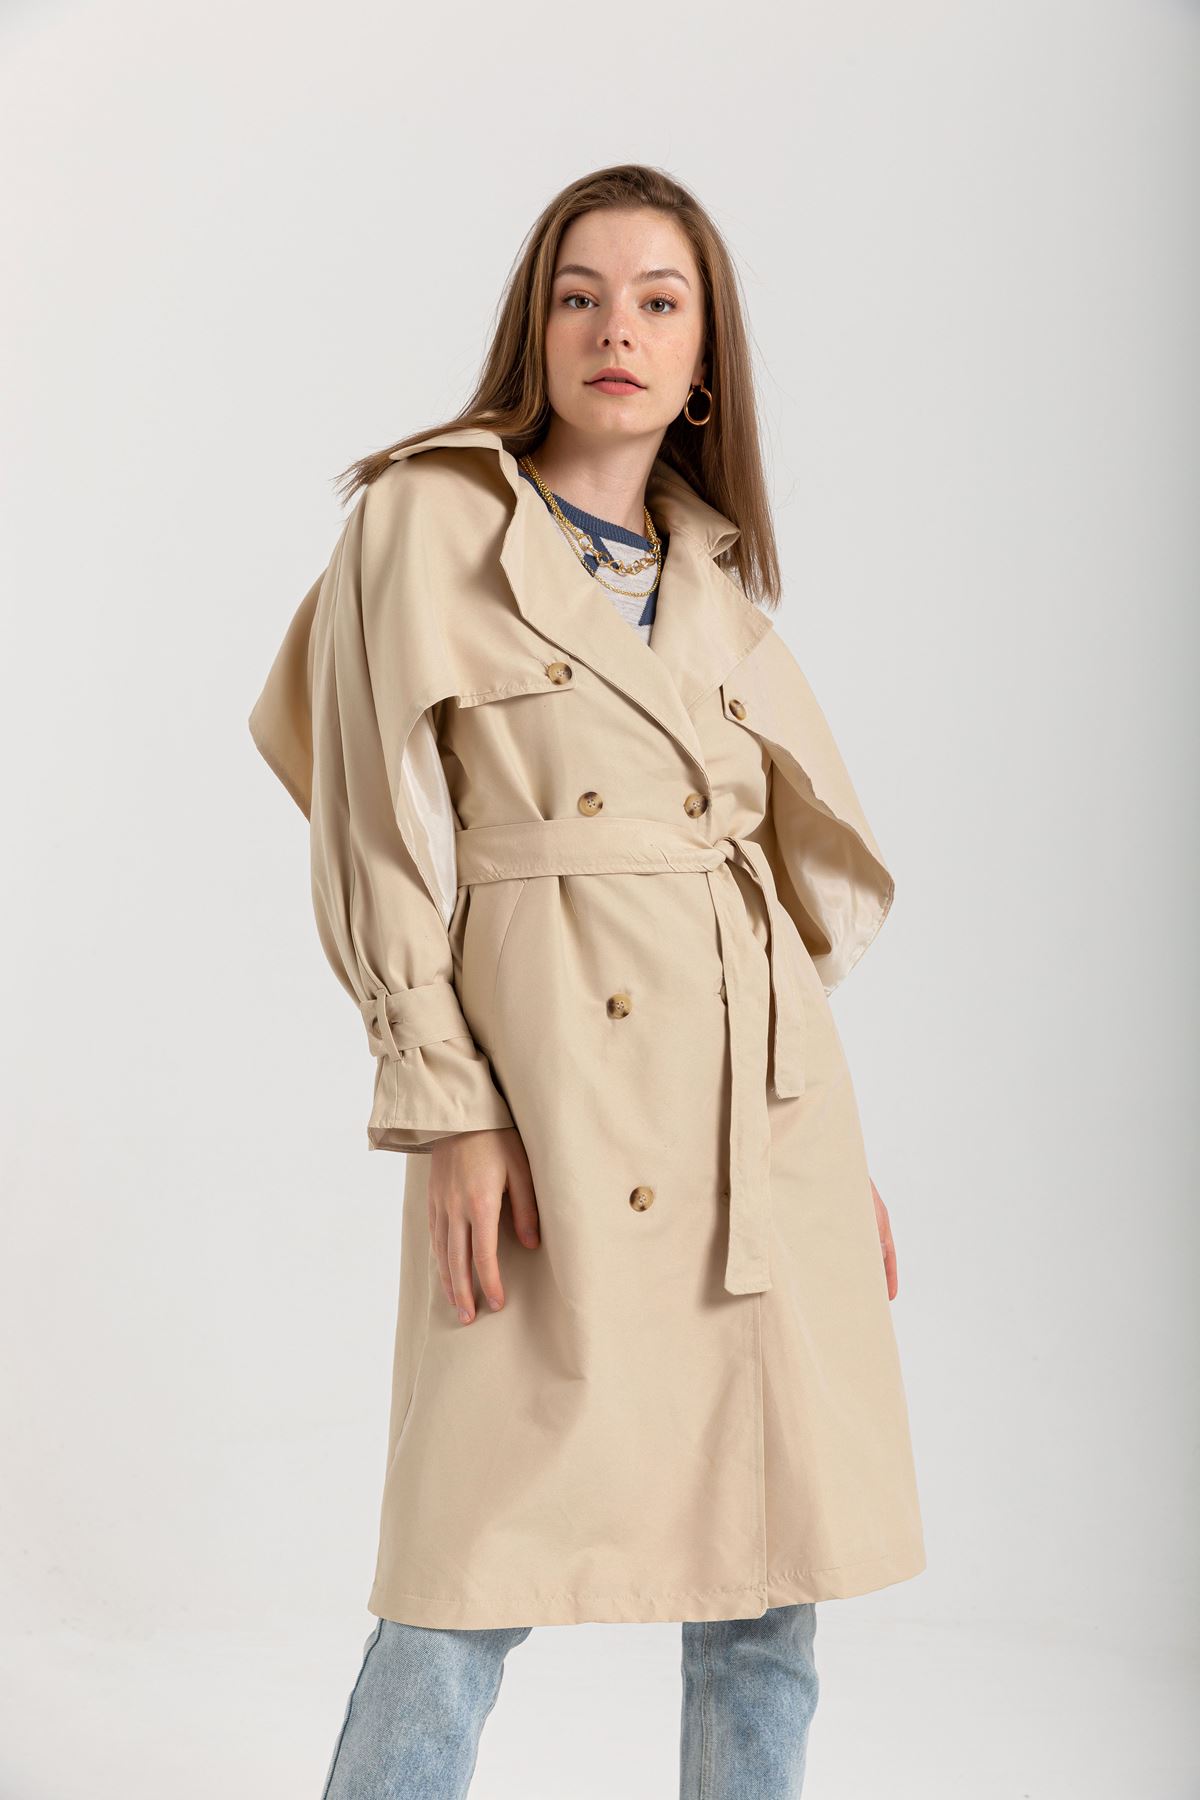 Soft Fabric Long Sleeve Shirt Collar Women Trench Coat With Belt - Stone